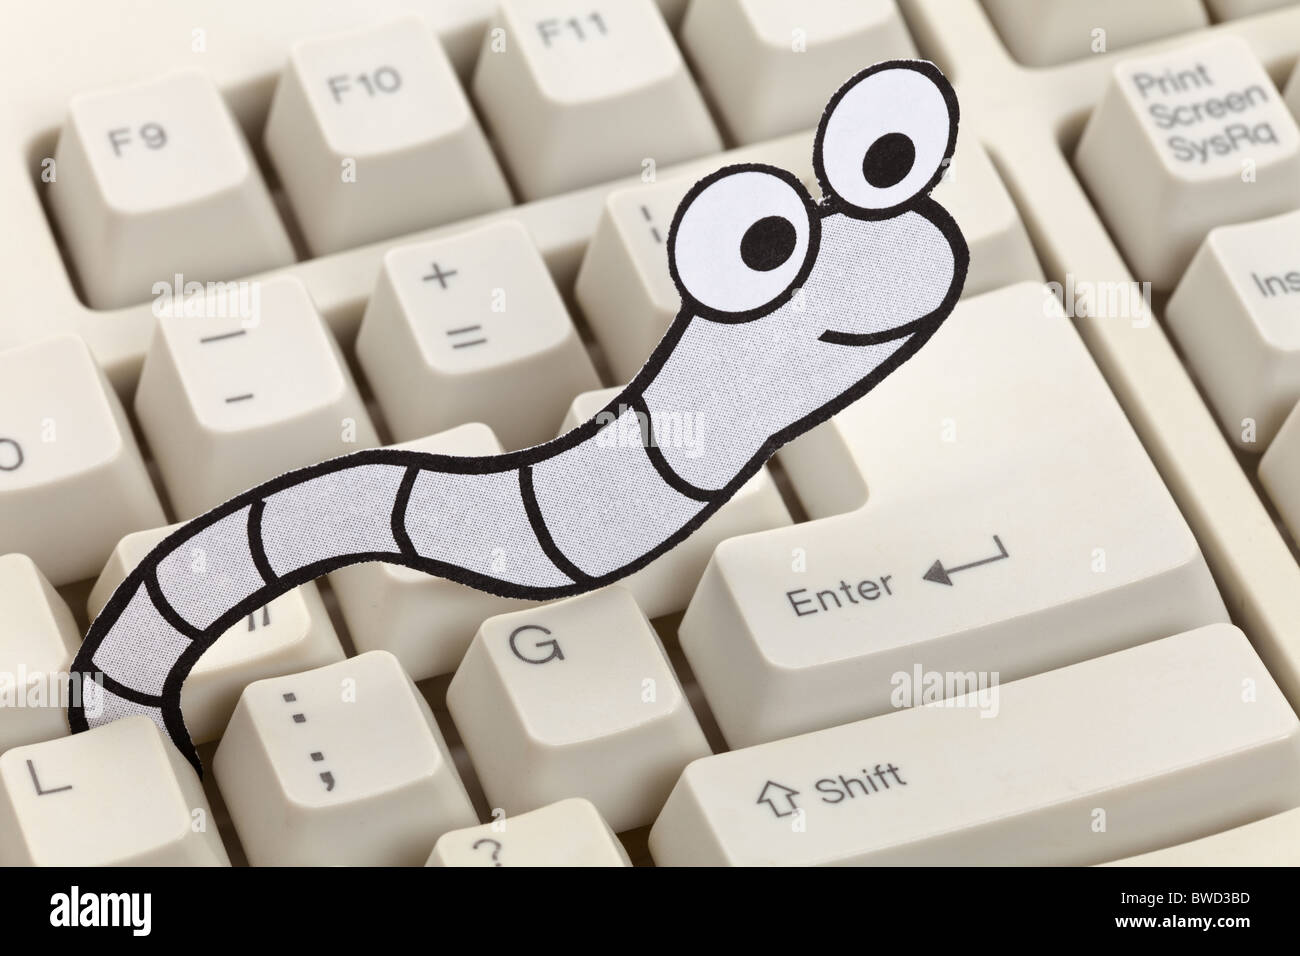 Worm and computer keyboard, concept of Security, Virus Stock Photo